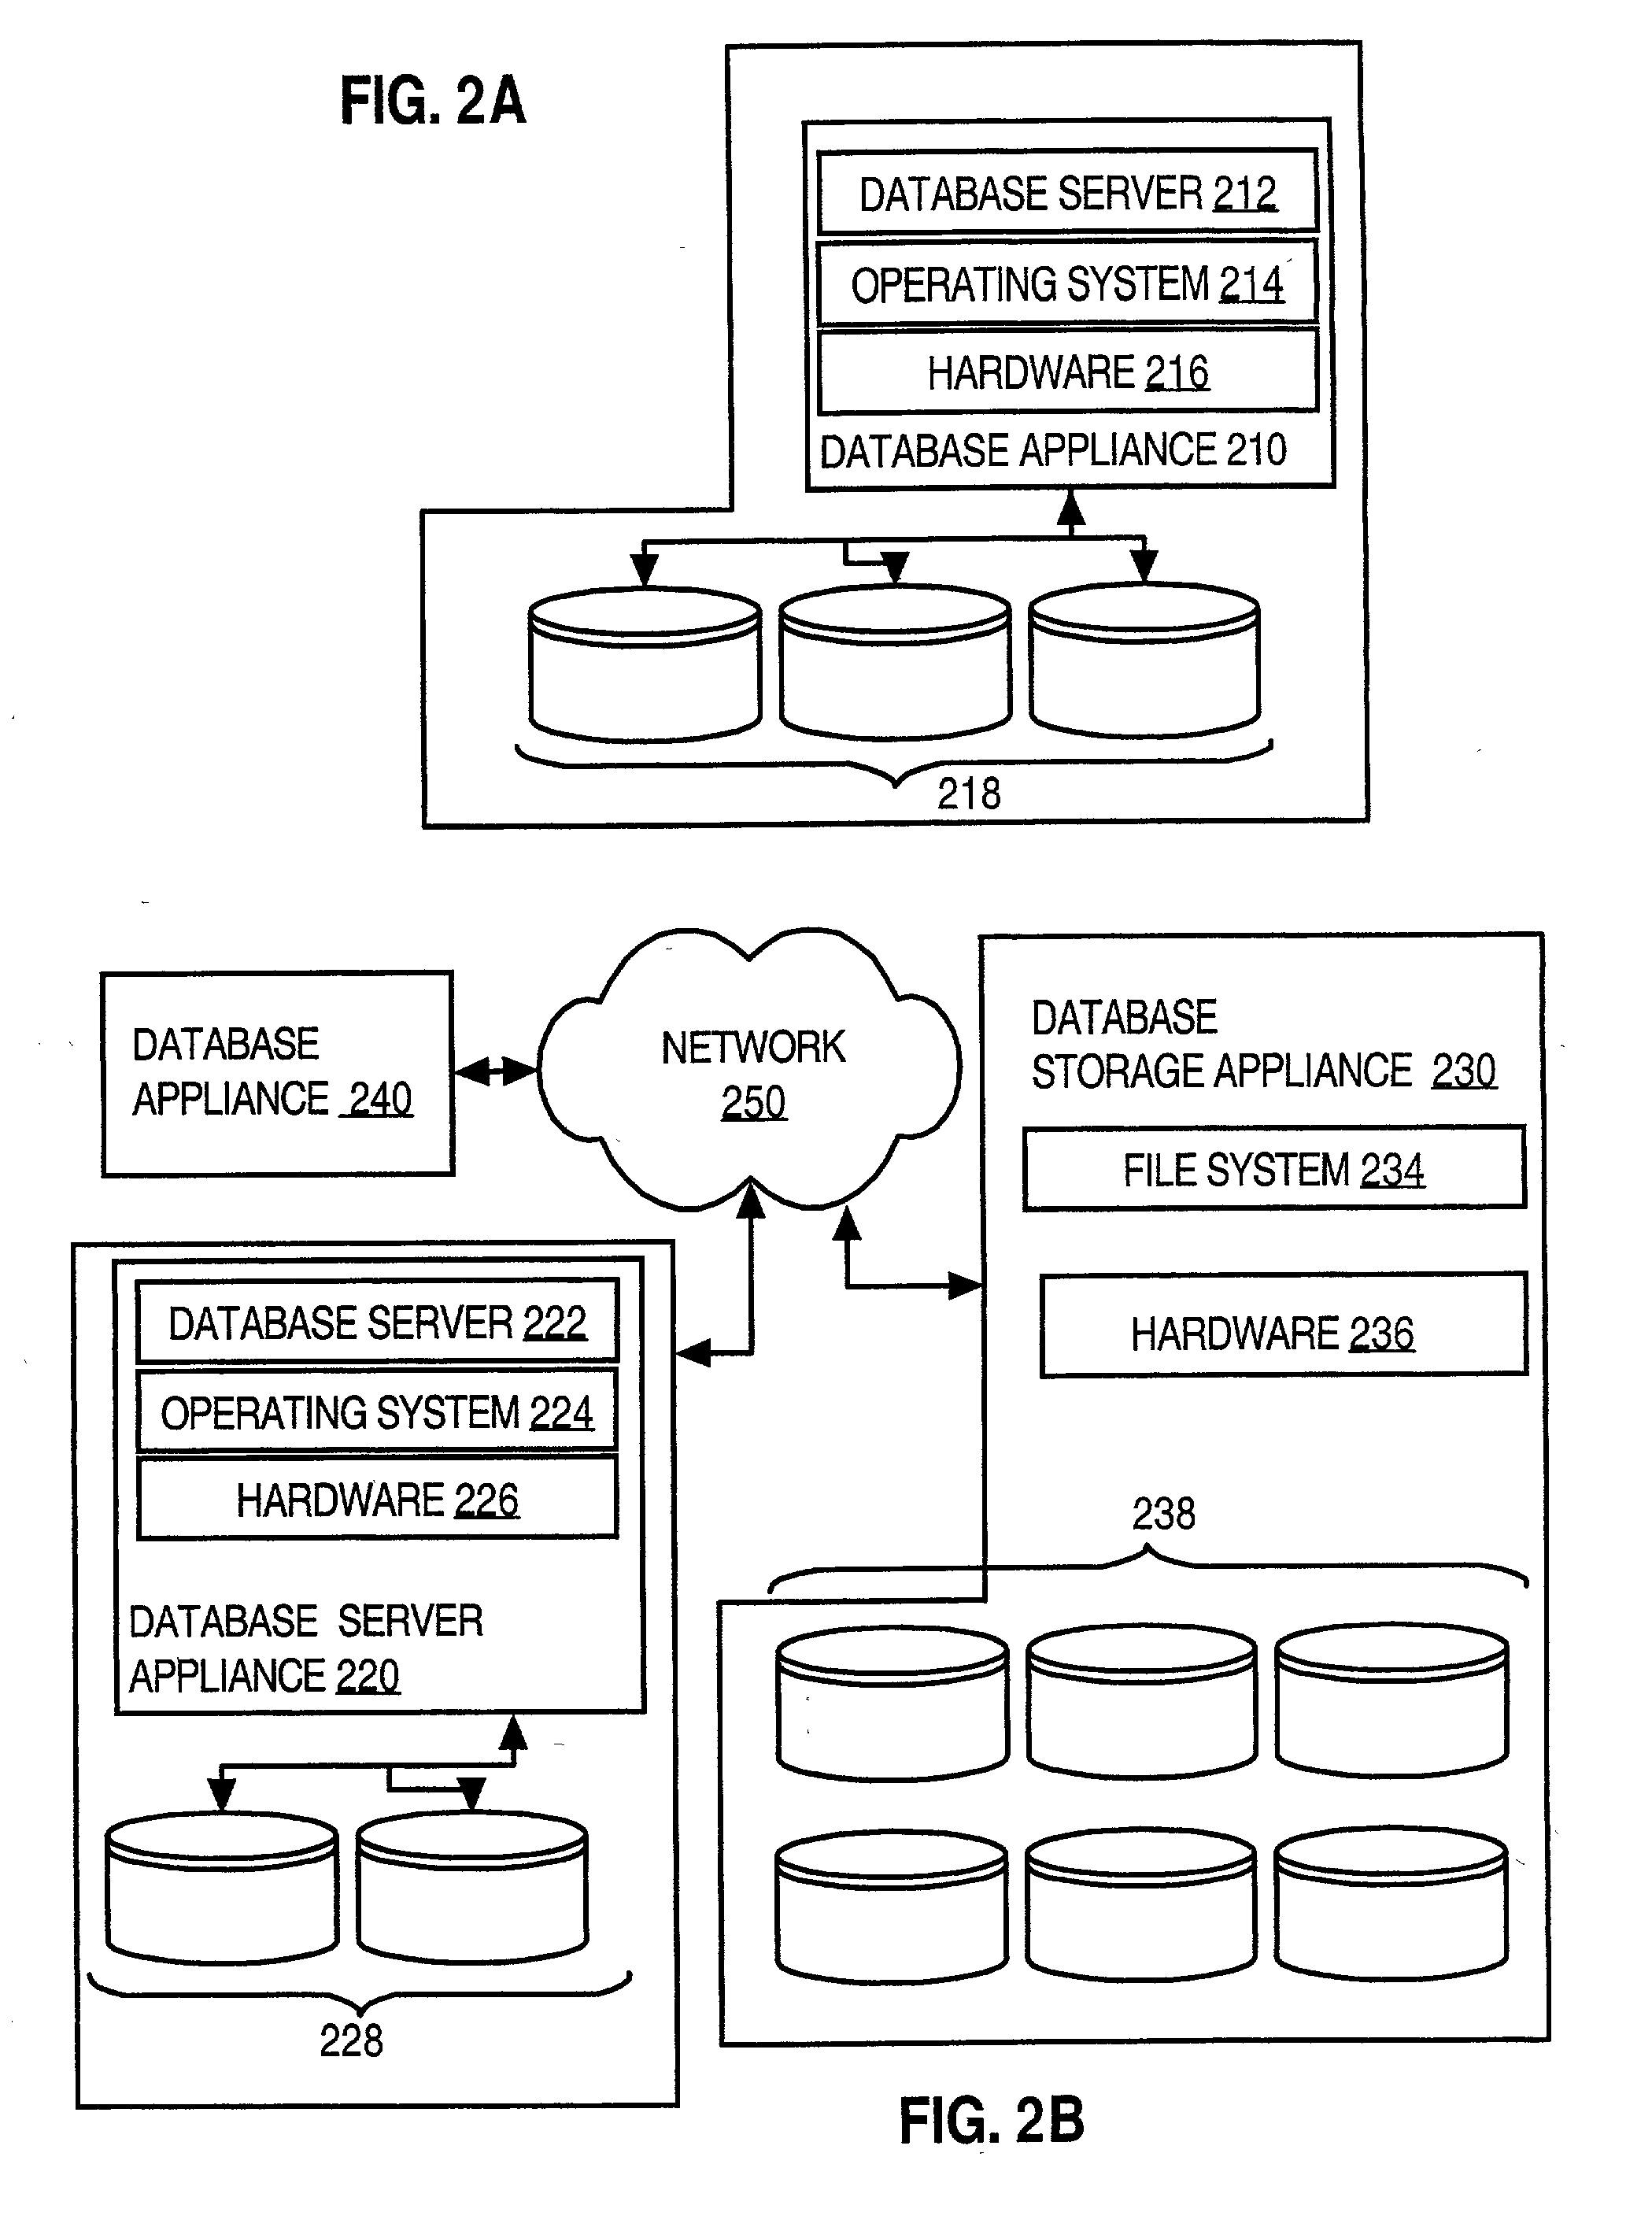 Techniques for automatically installing and configuring database applications